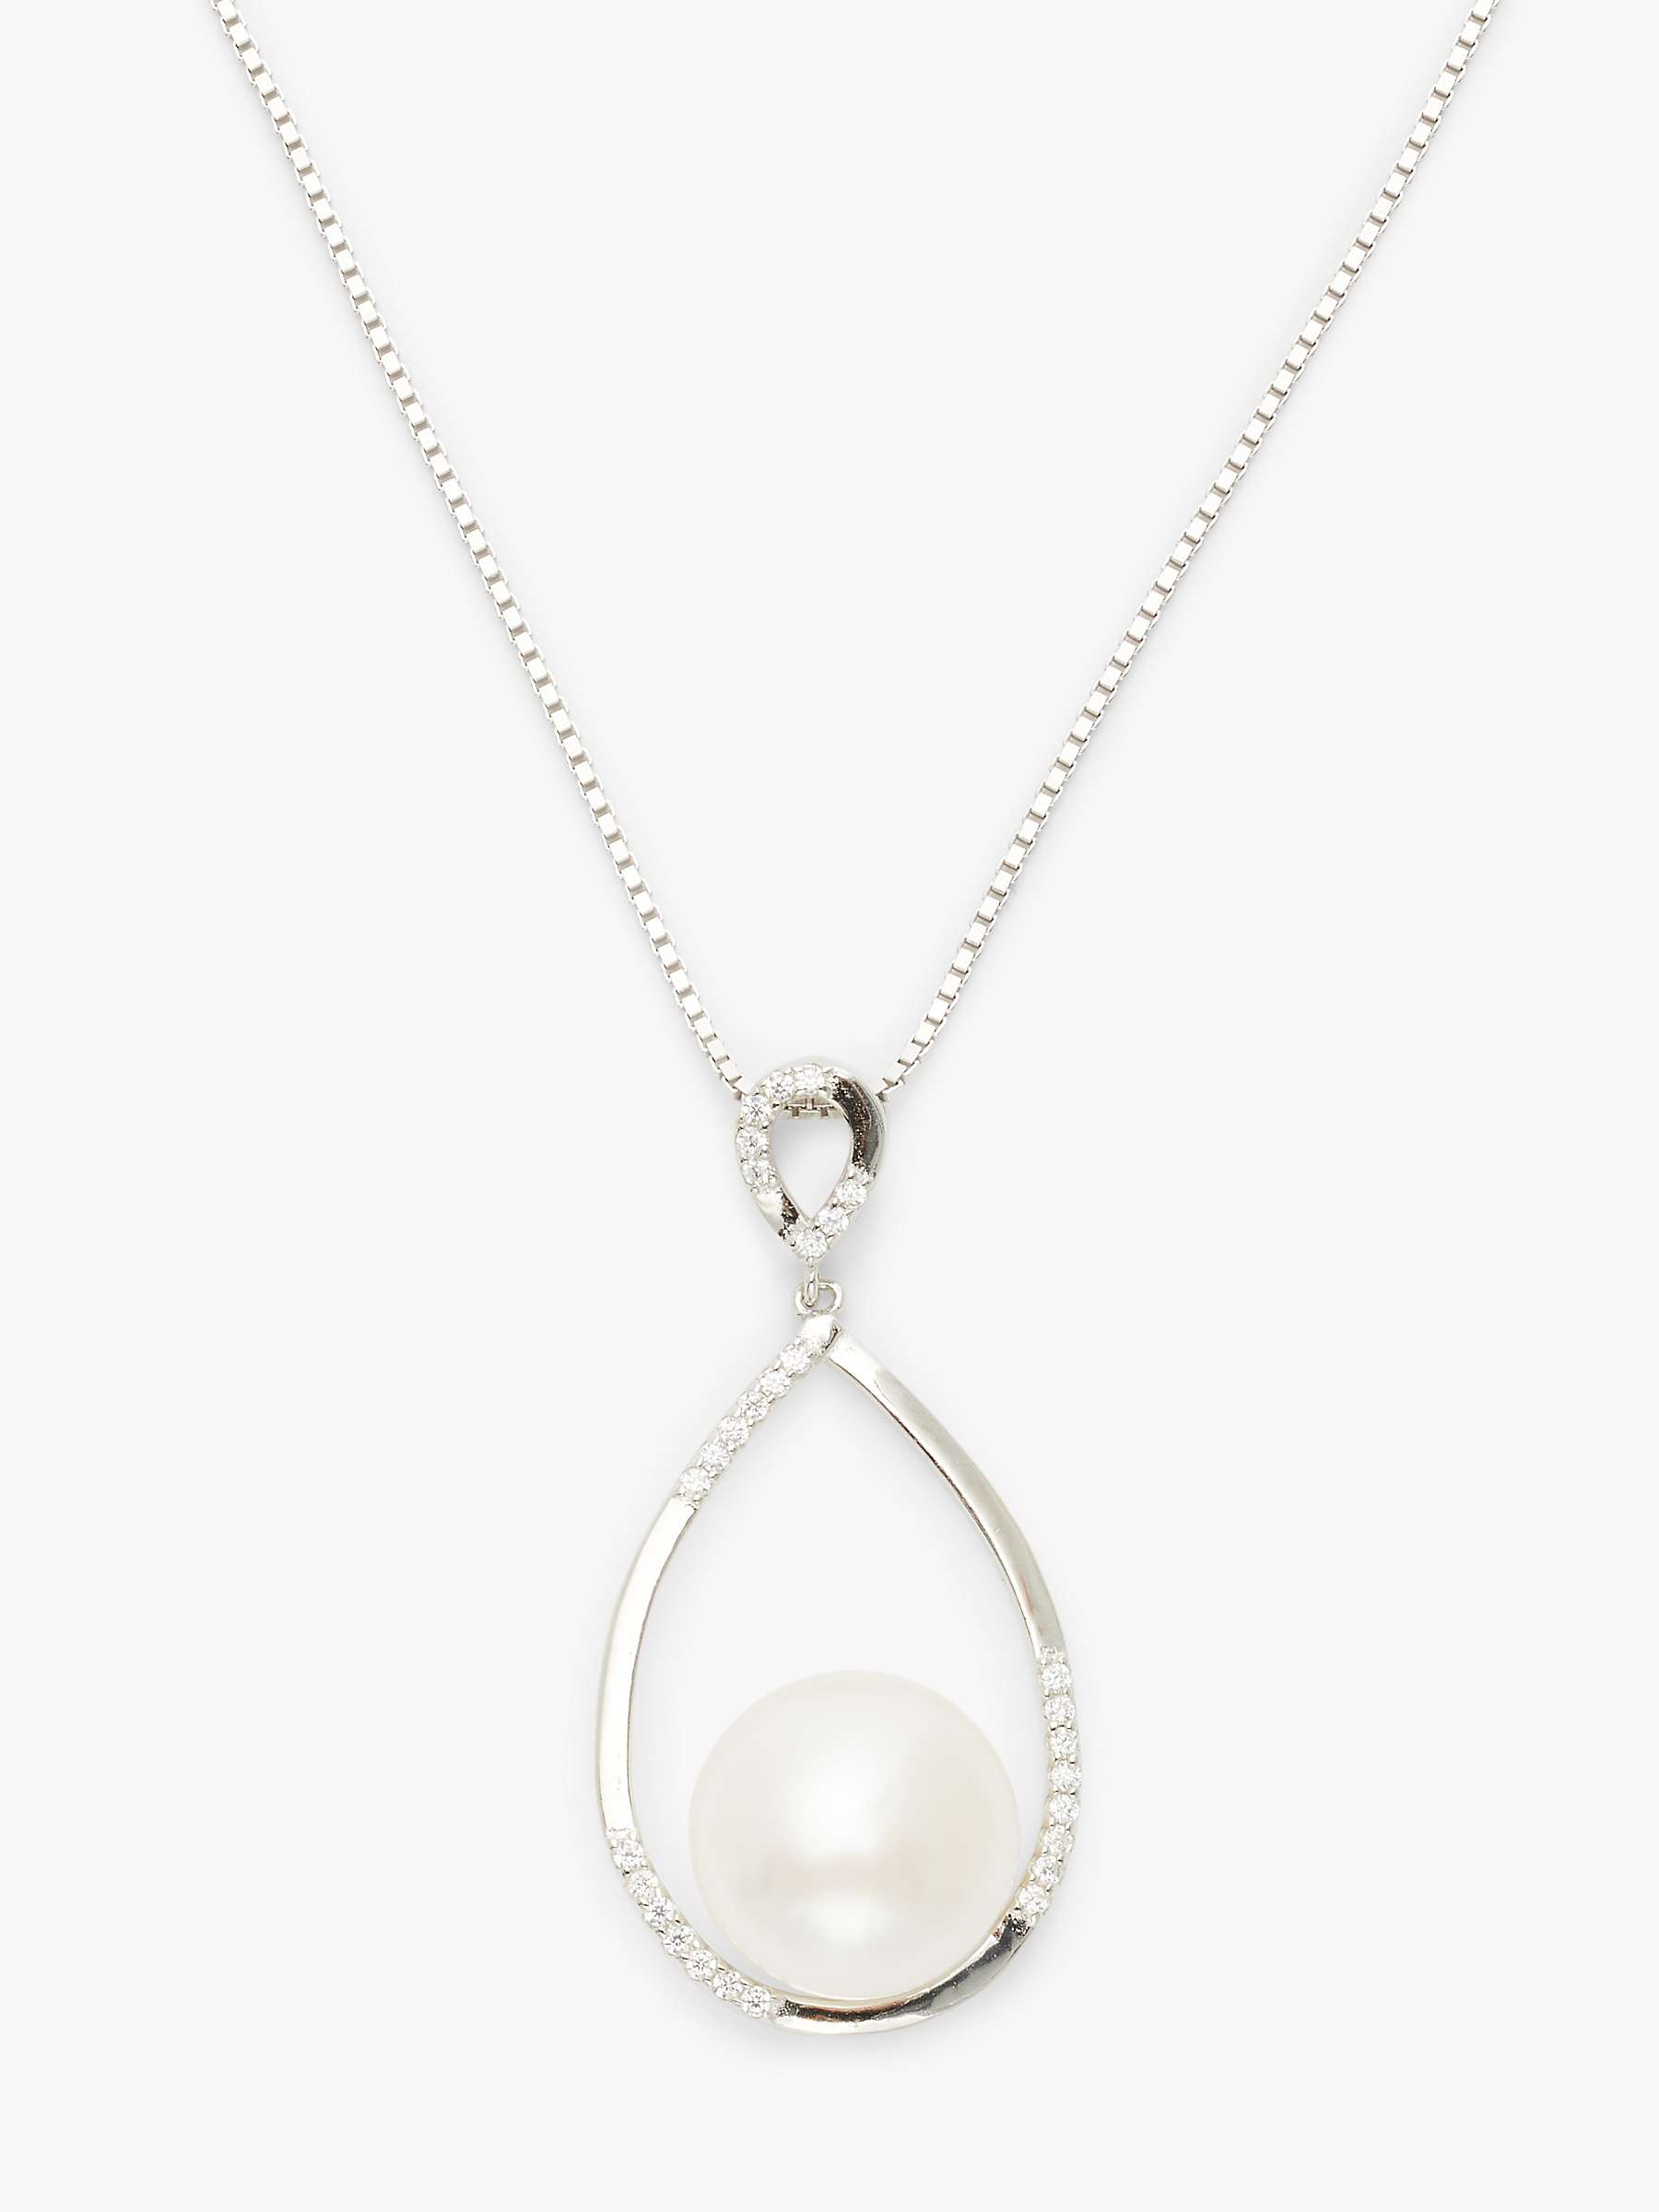 Buy Lido Freshwater Pearl & Cubic Zirconia Teardrop Pendant Necklace, Silver Online at johnlewis.com